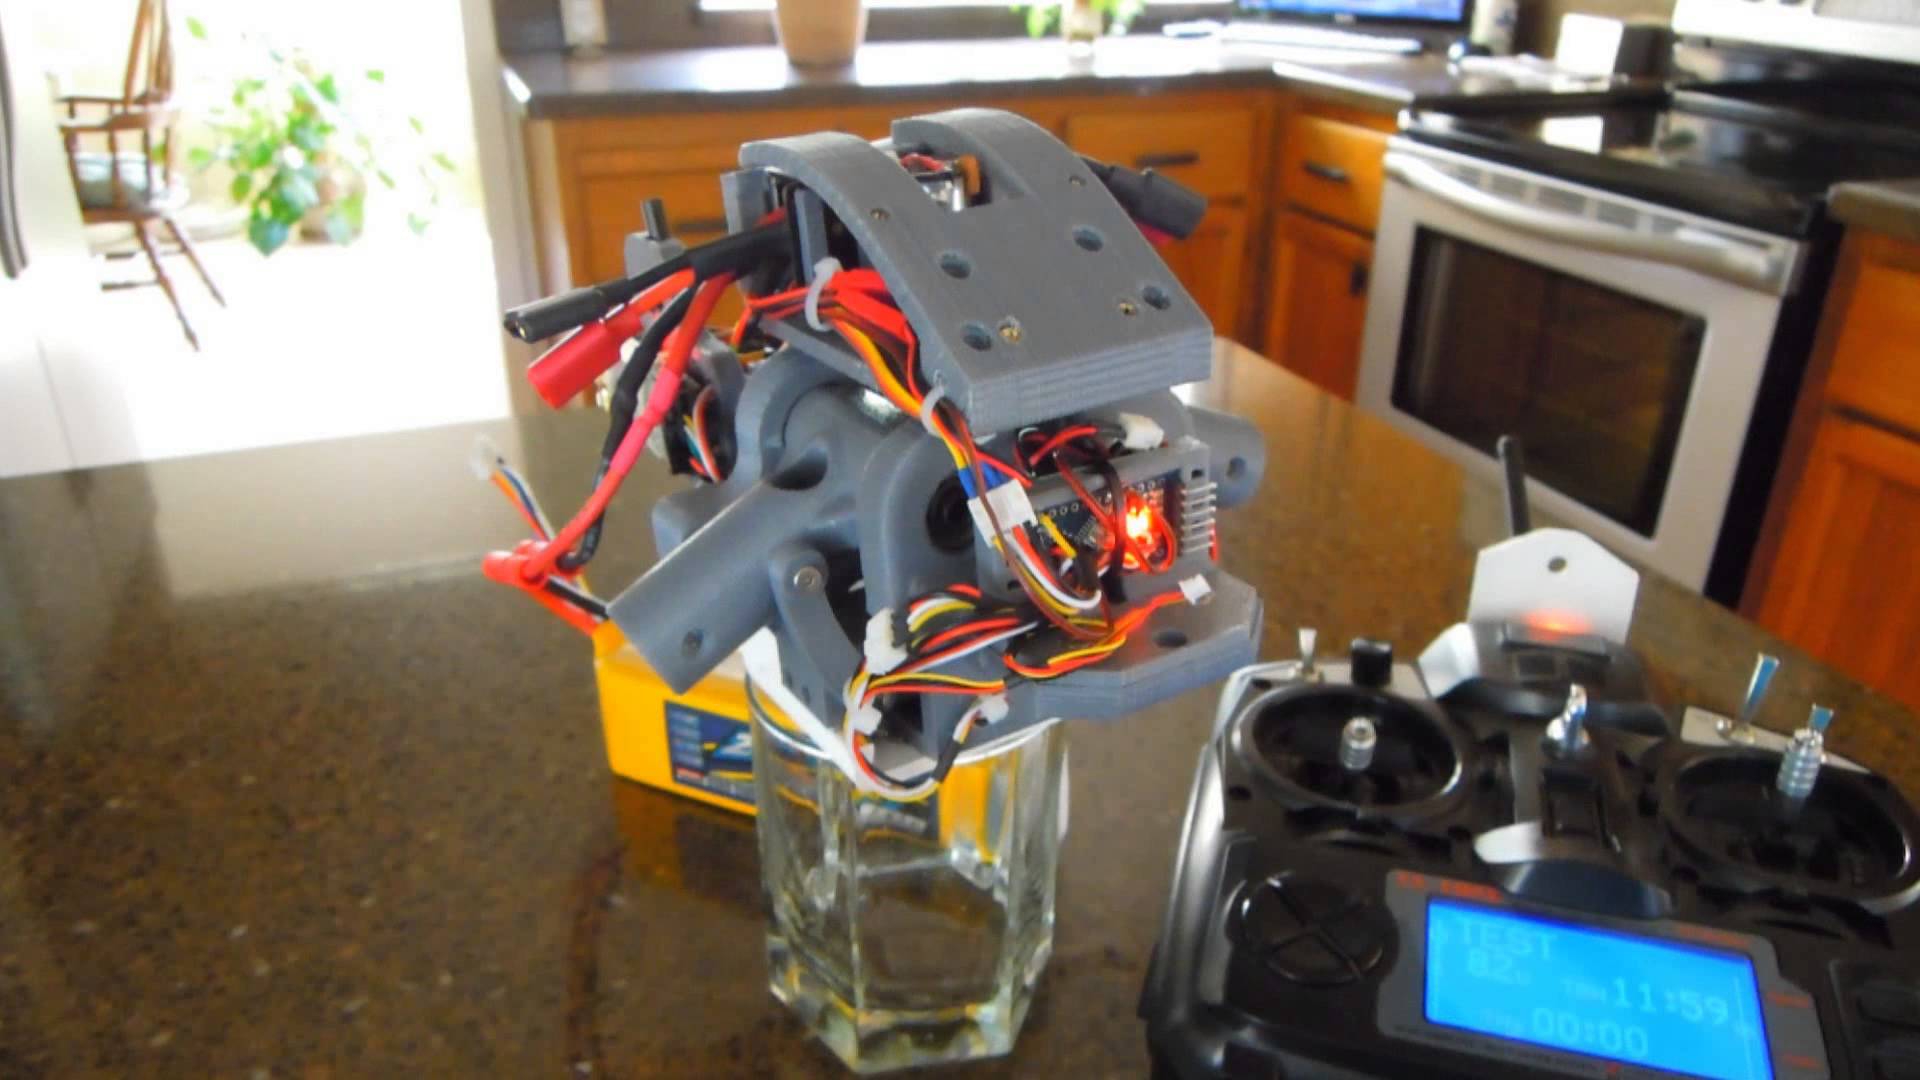 3D Printed Quadcopter — Motorized Arm Retract Test